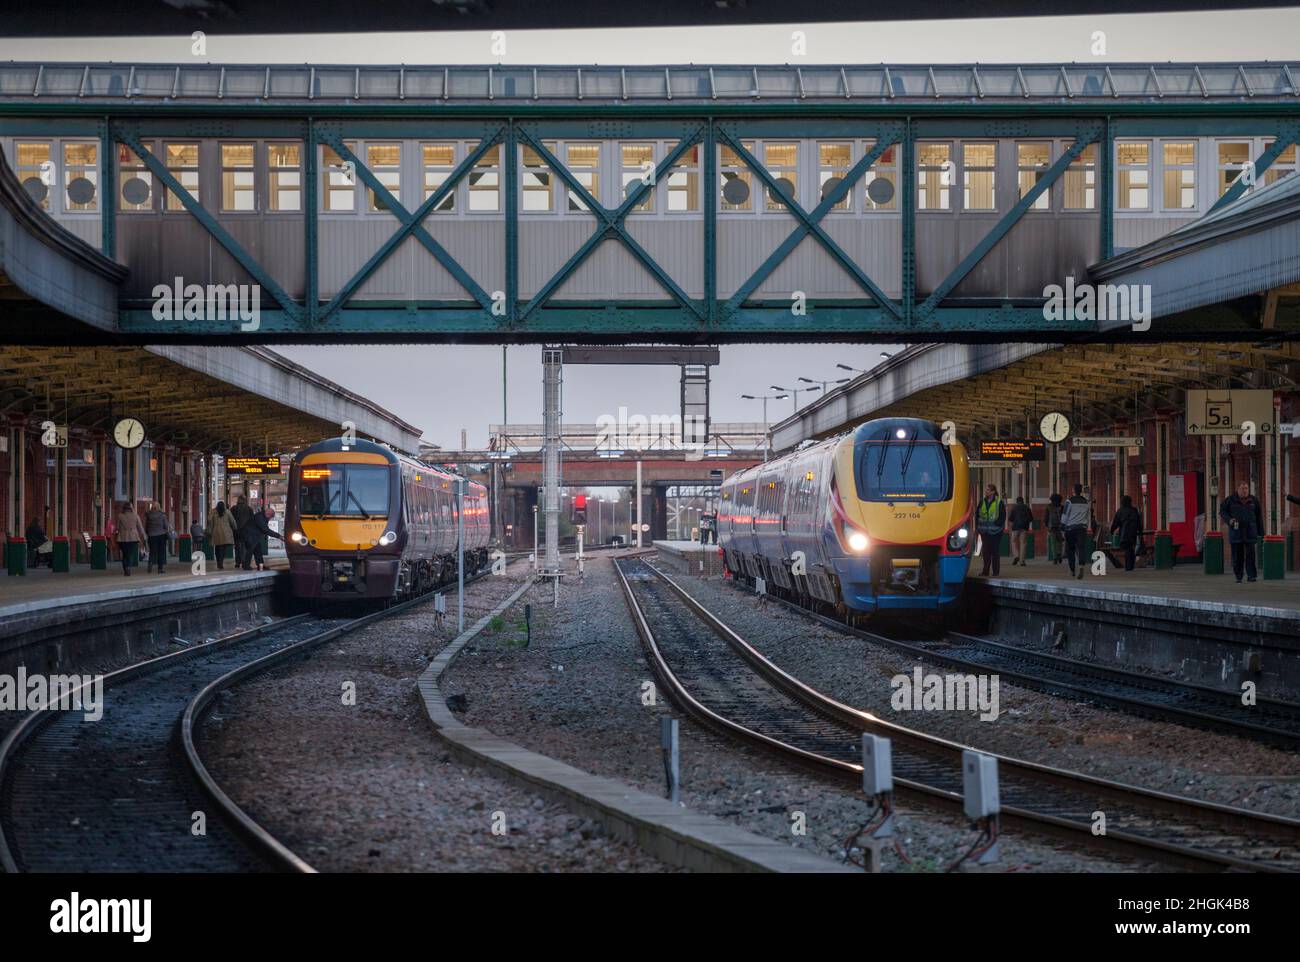 Crosscountry trains and  East Midlands railway trains connecting at Nottingham railway station with analogue railway station clocks. Stock Photo